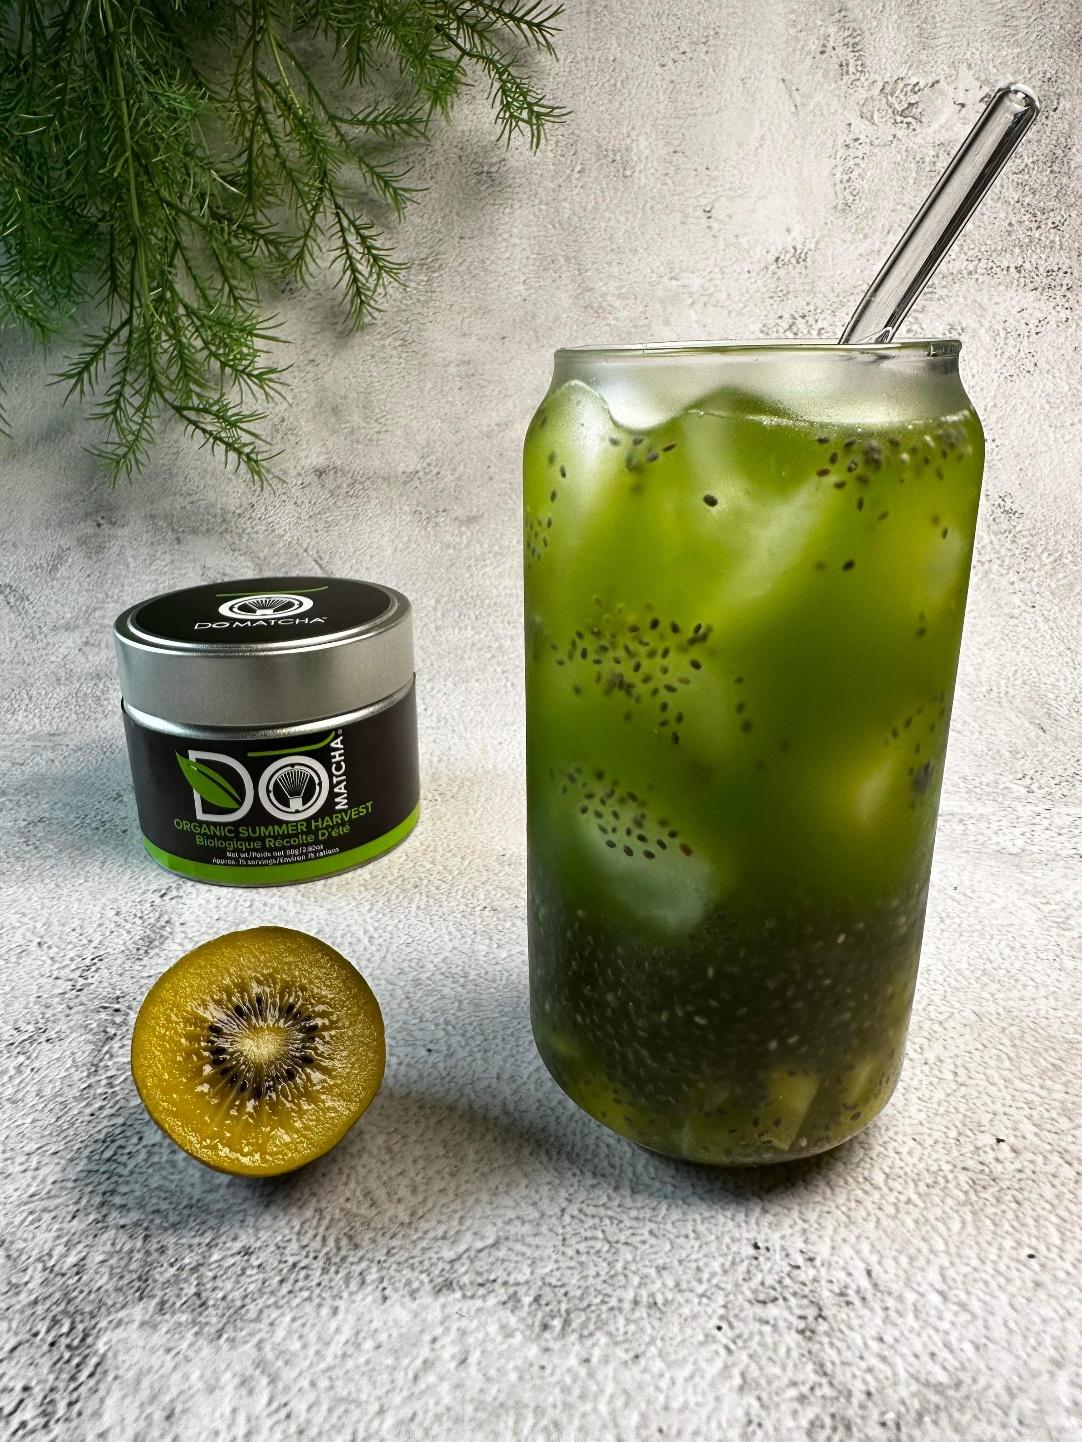 A green drink in a glass jar next to a half of a kiwi

